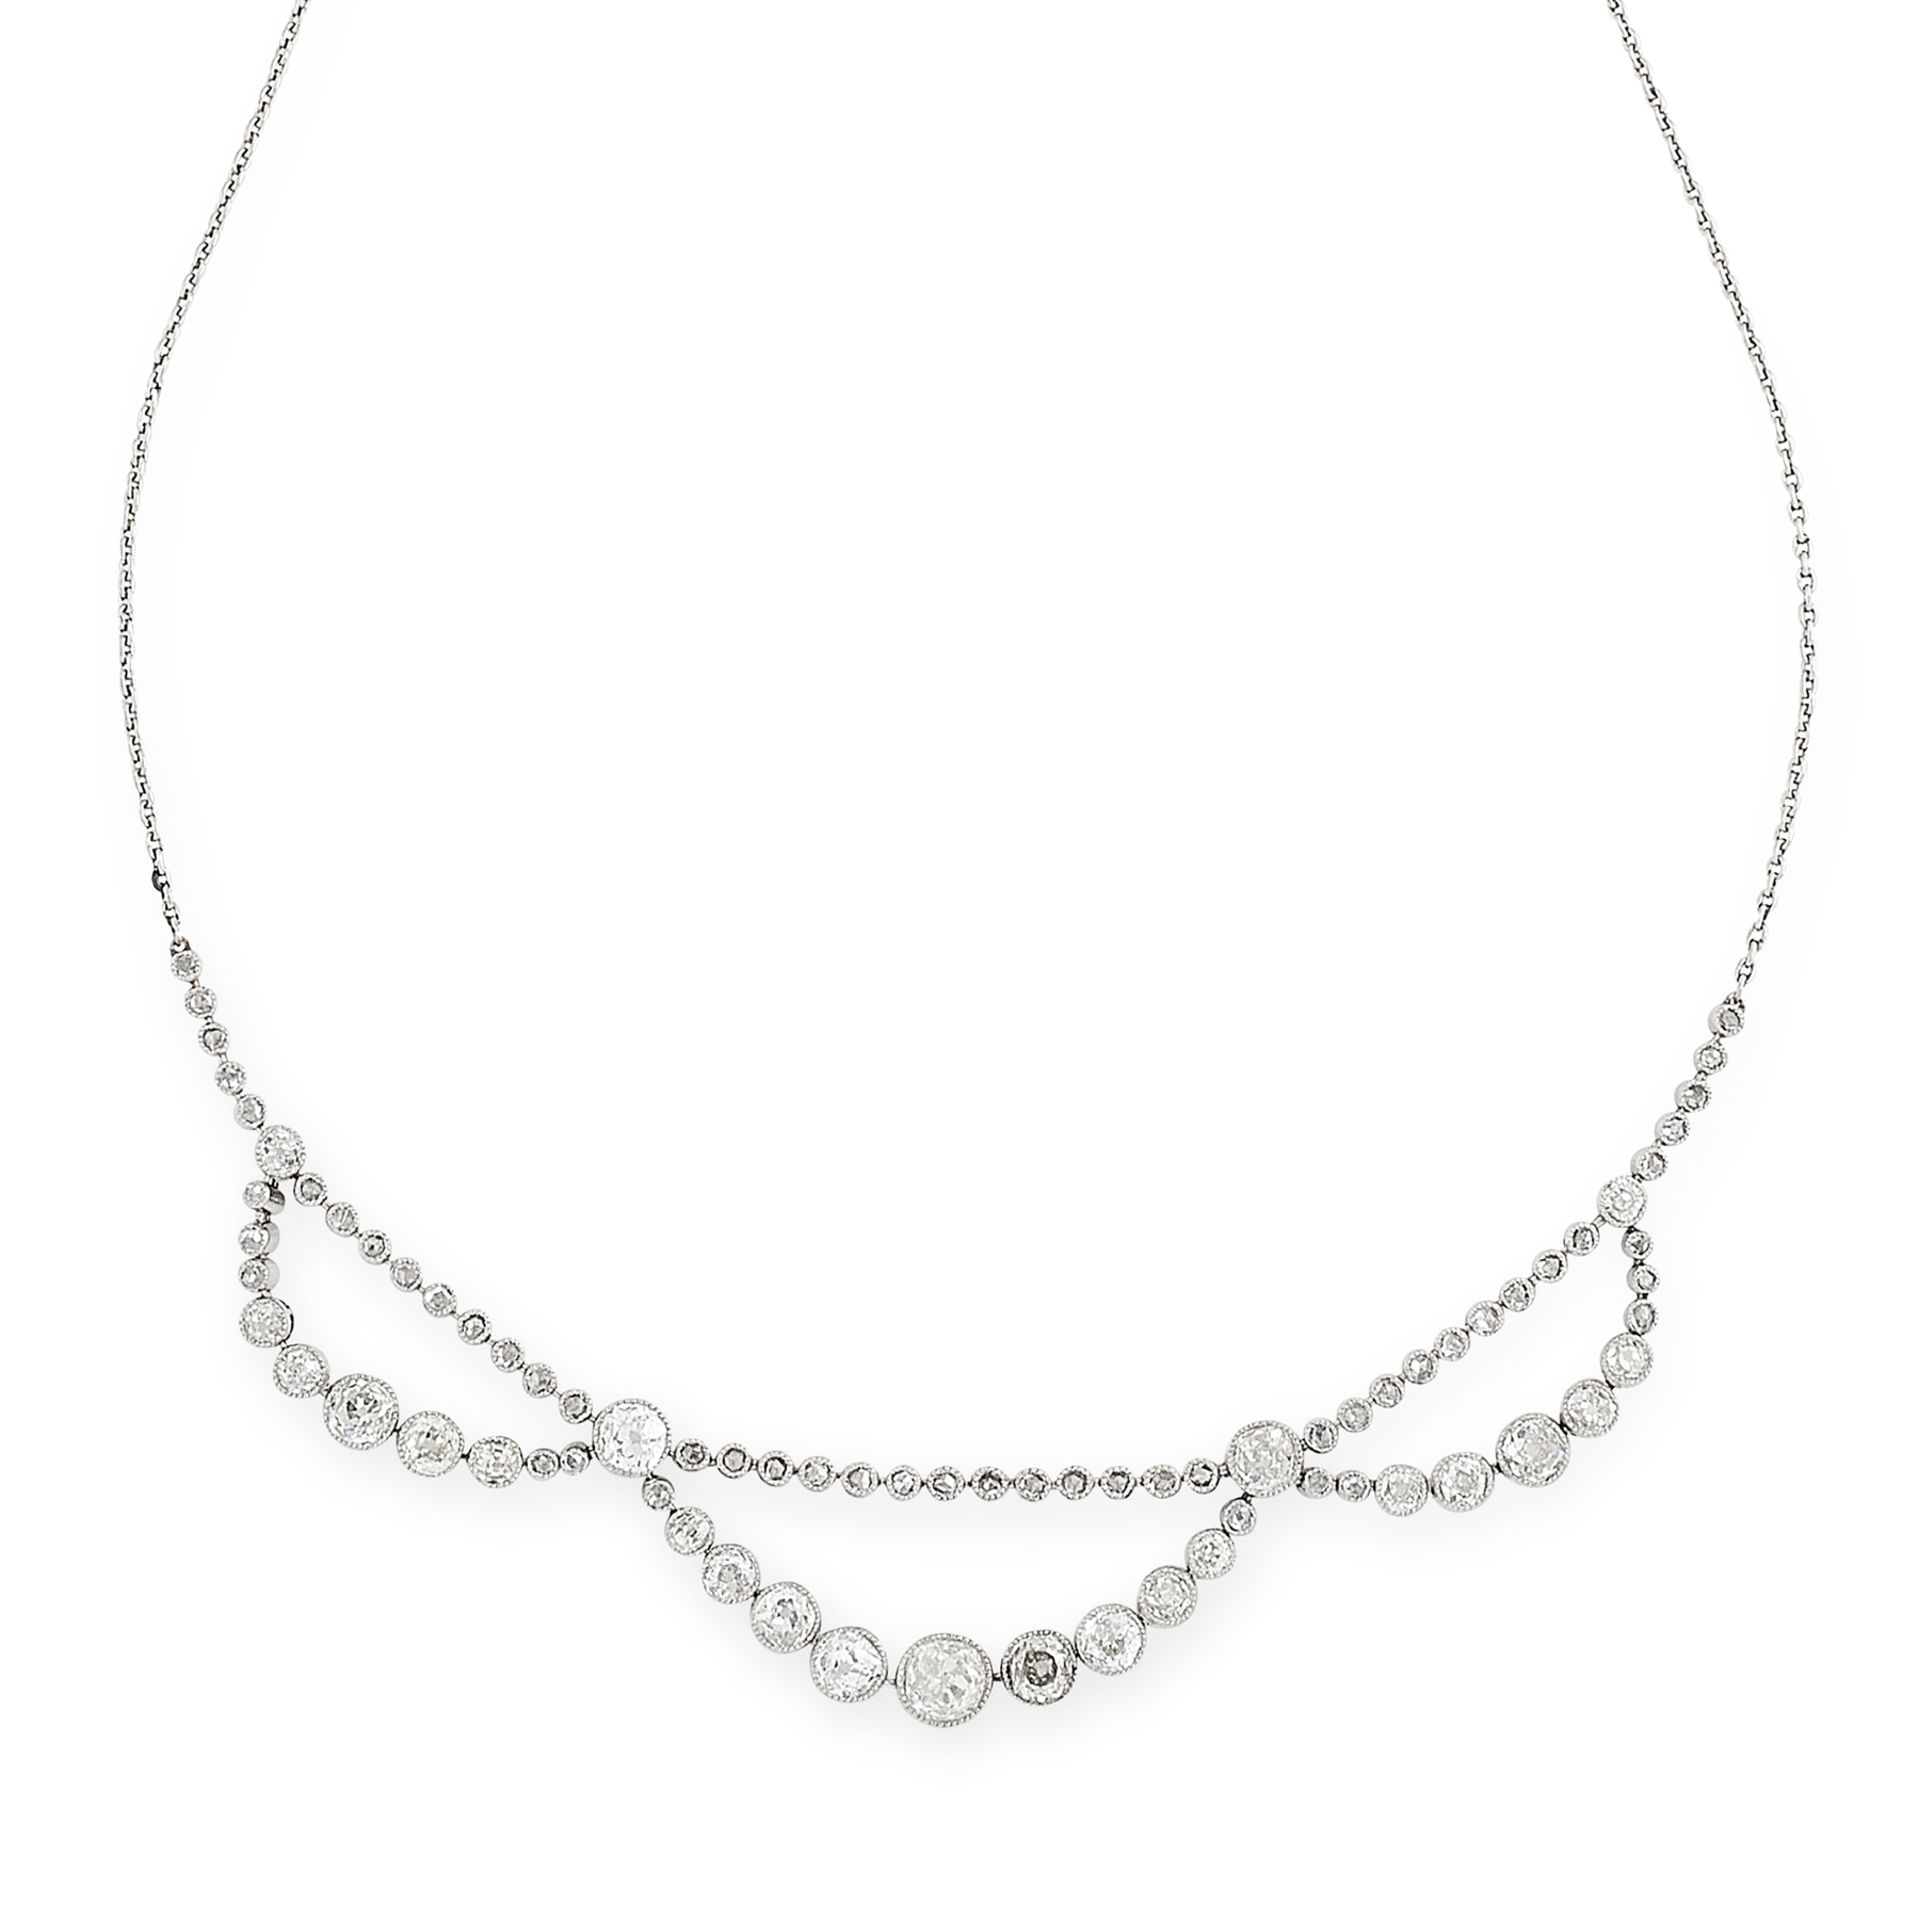 AN ANTIQUE DIAMOND NECKLACE, EARLY 20TH CENTURY set with a row of rose cut diamonds, suspending